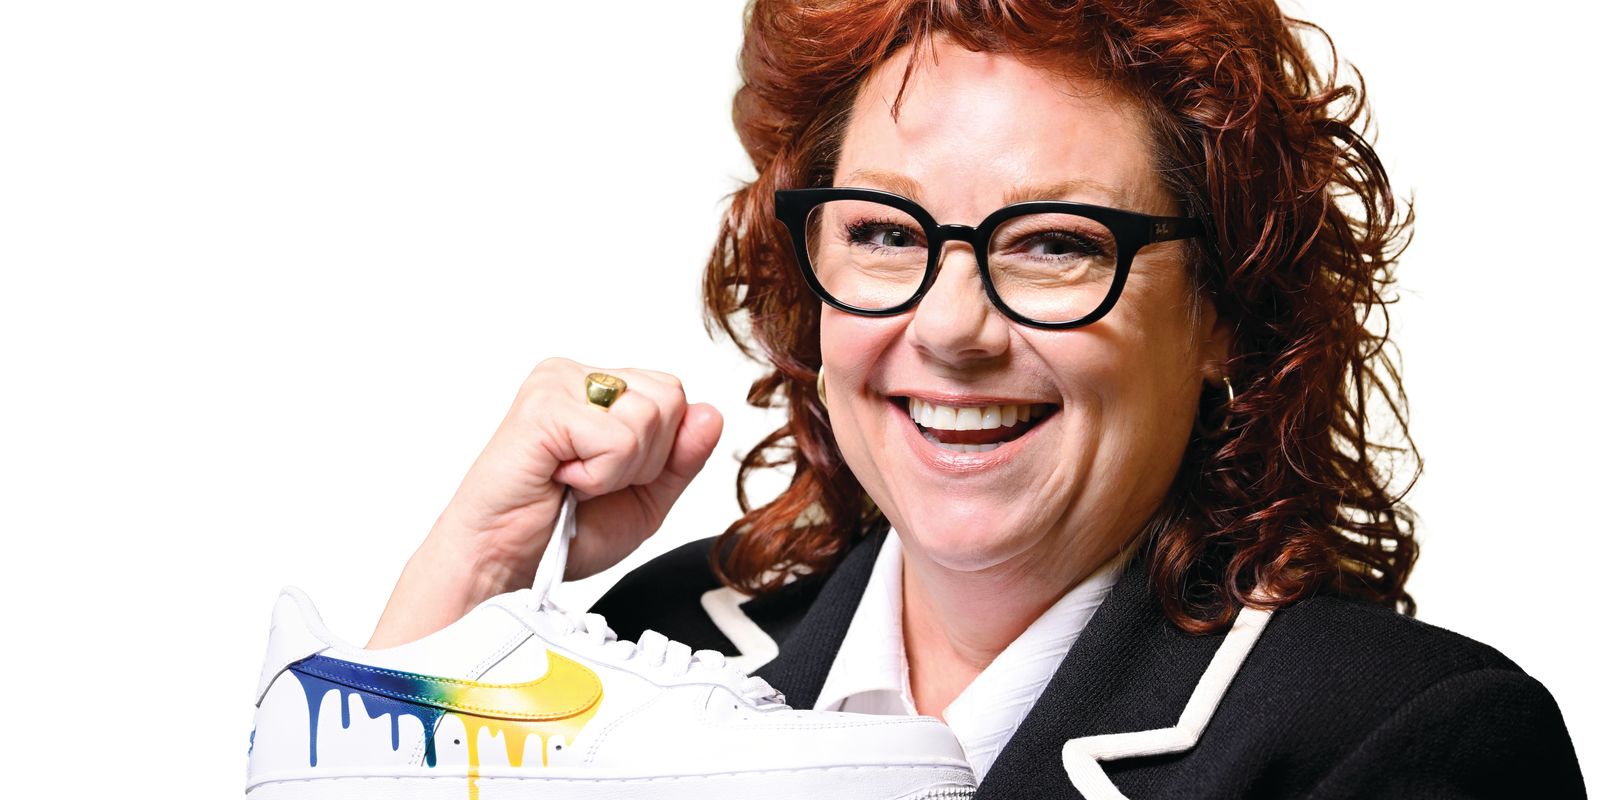 woman, red hair, glasses, holds sneaker with dripping gold and blue paint